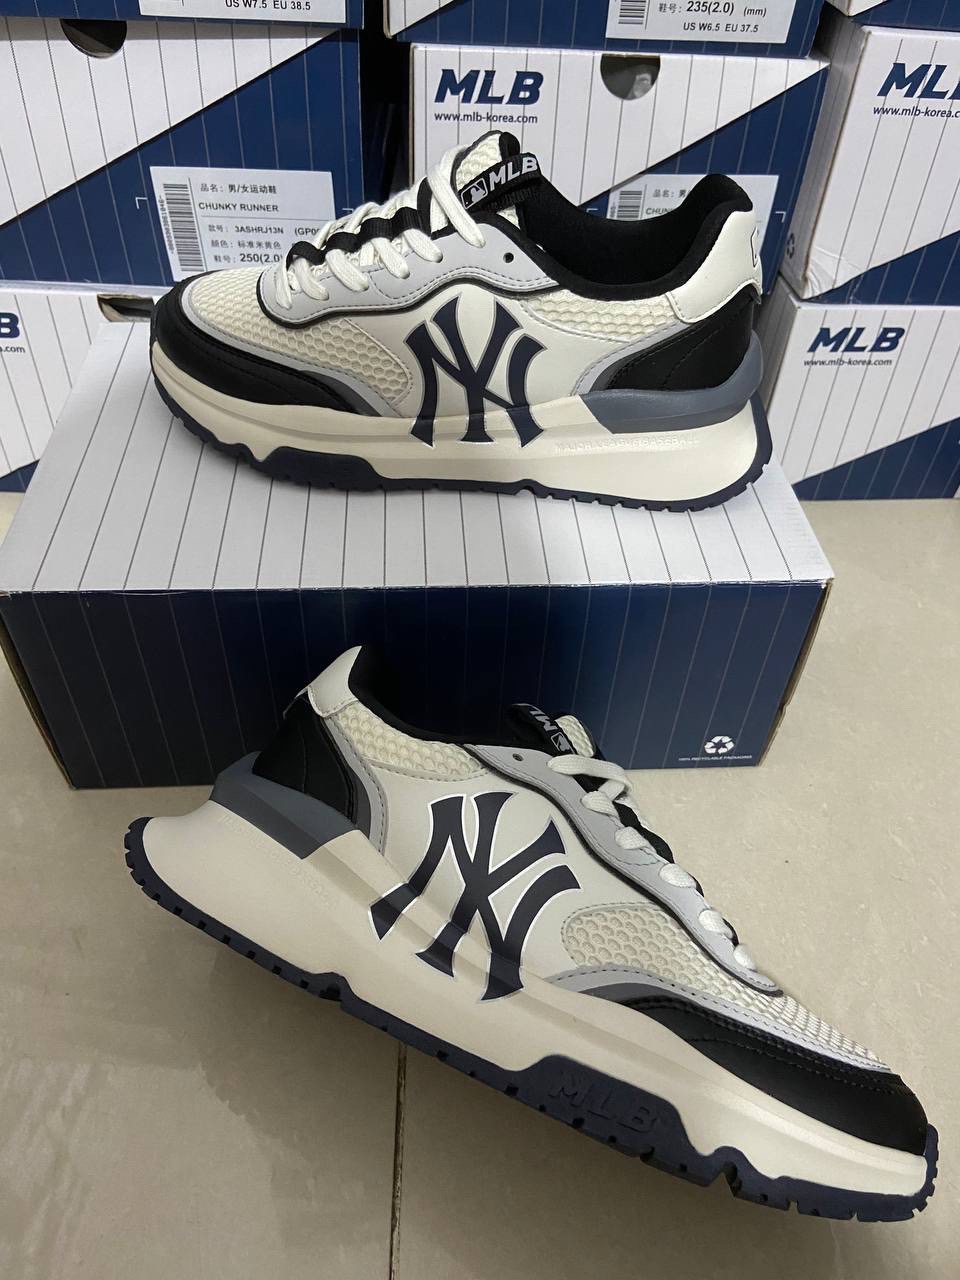 MLB KOREA YANKEES SHOES SIZE US 8 WOMENS Womens Fashion Footwear  Sneakers on Carousell